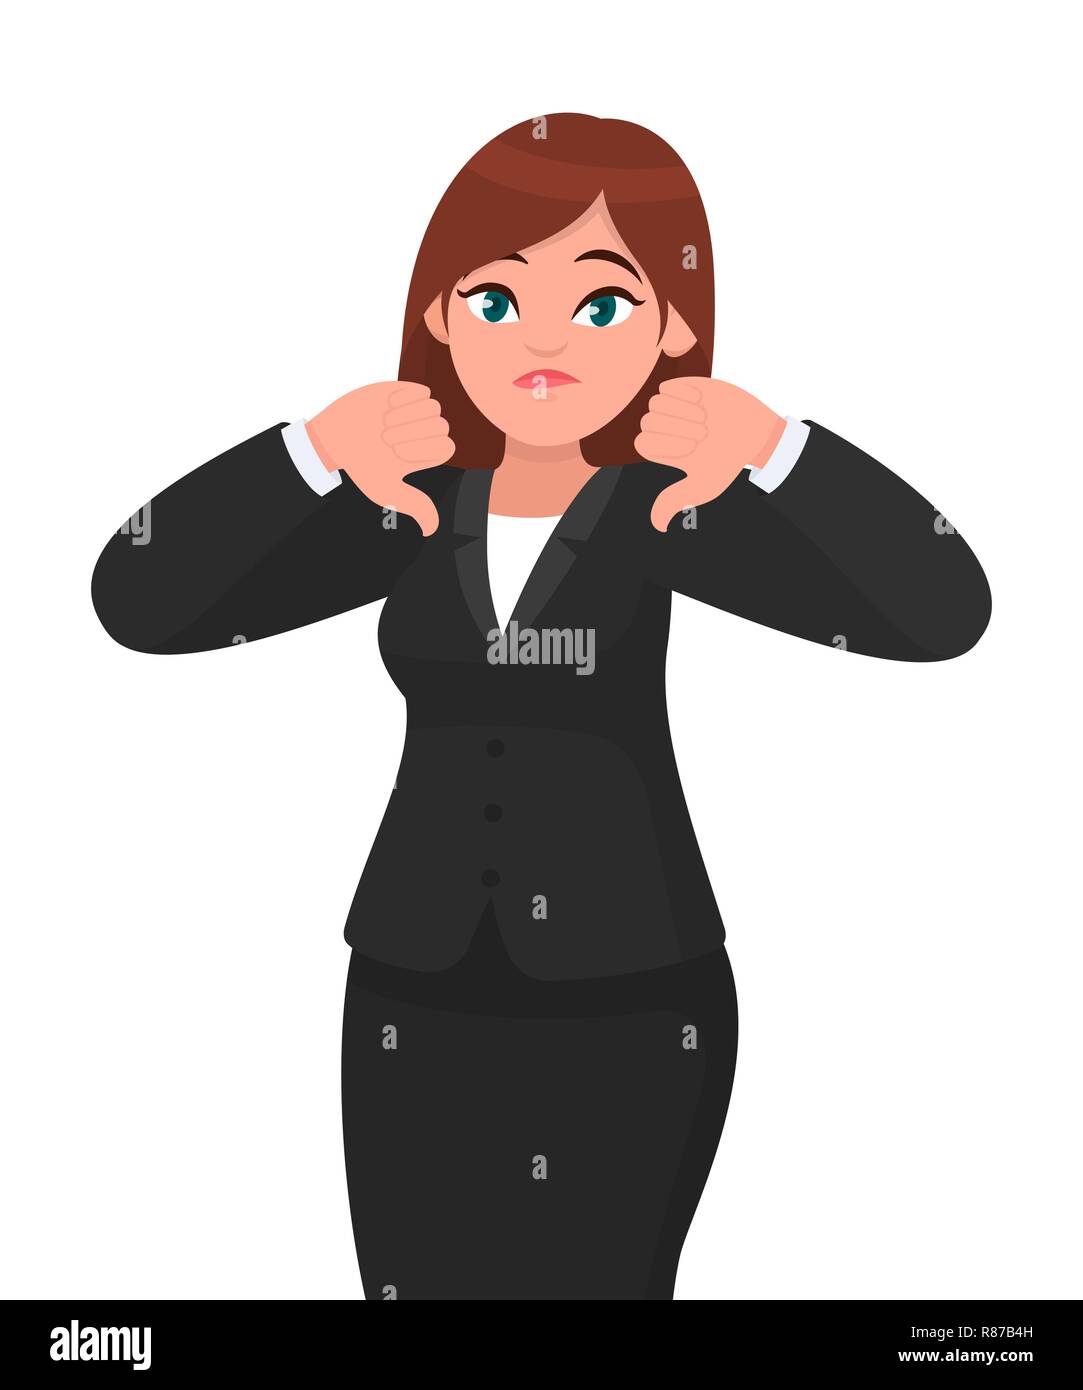 Businesswoman showing thumbs down gesture/sign. Dislike, disapprove, rejection, disagree concept illustration in vector cartoon style. Business woman Stock Vector